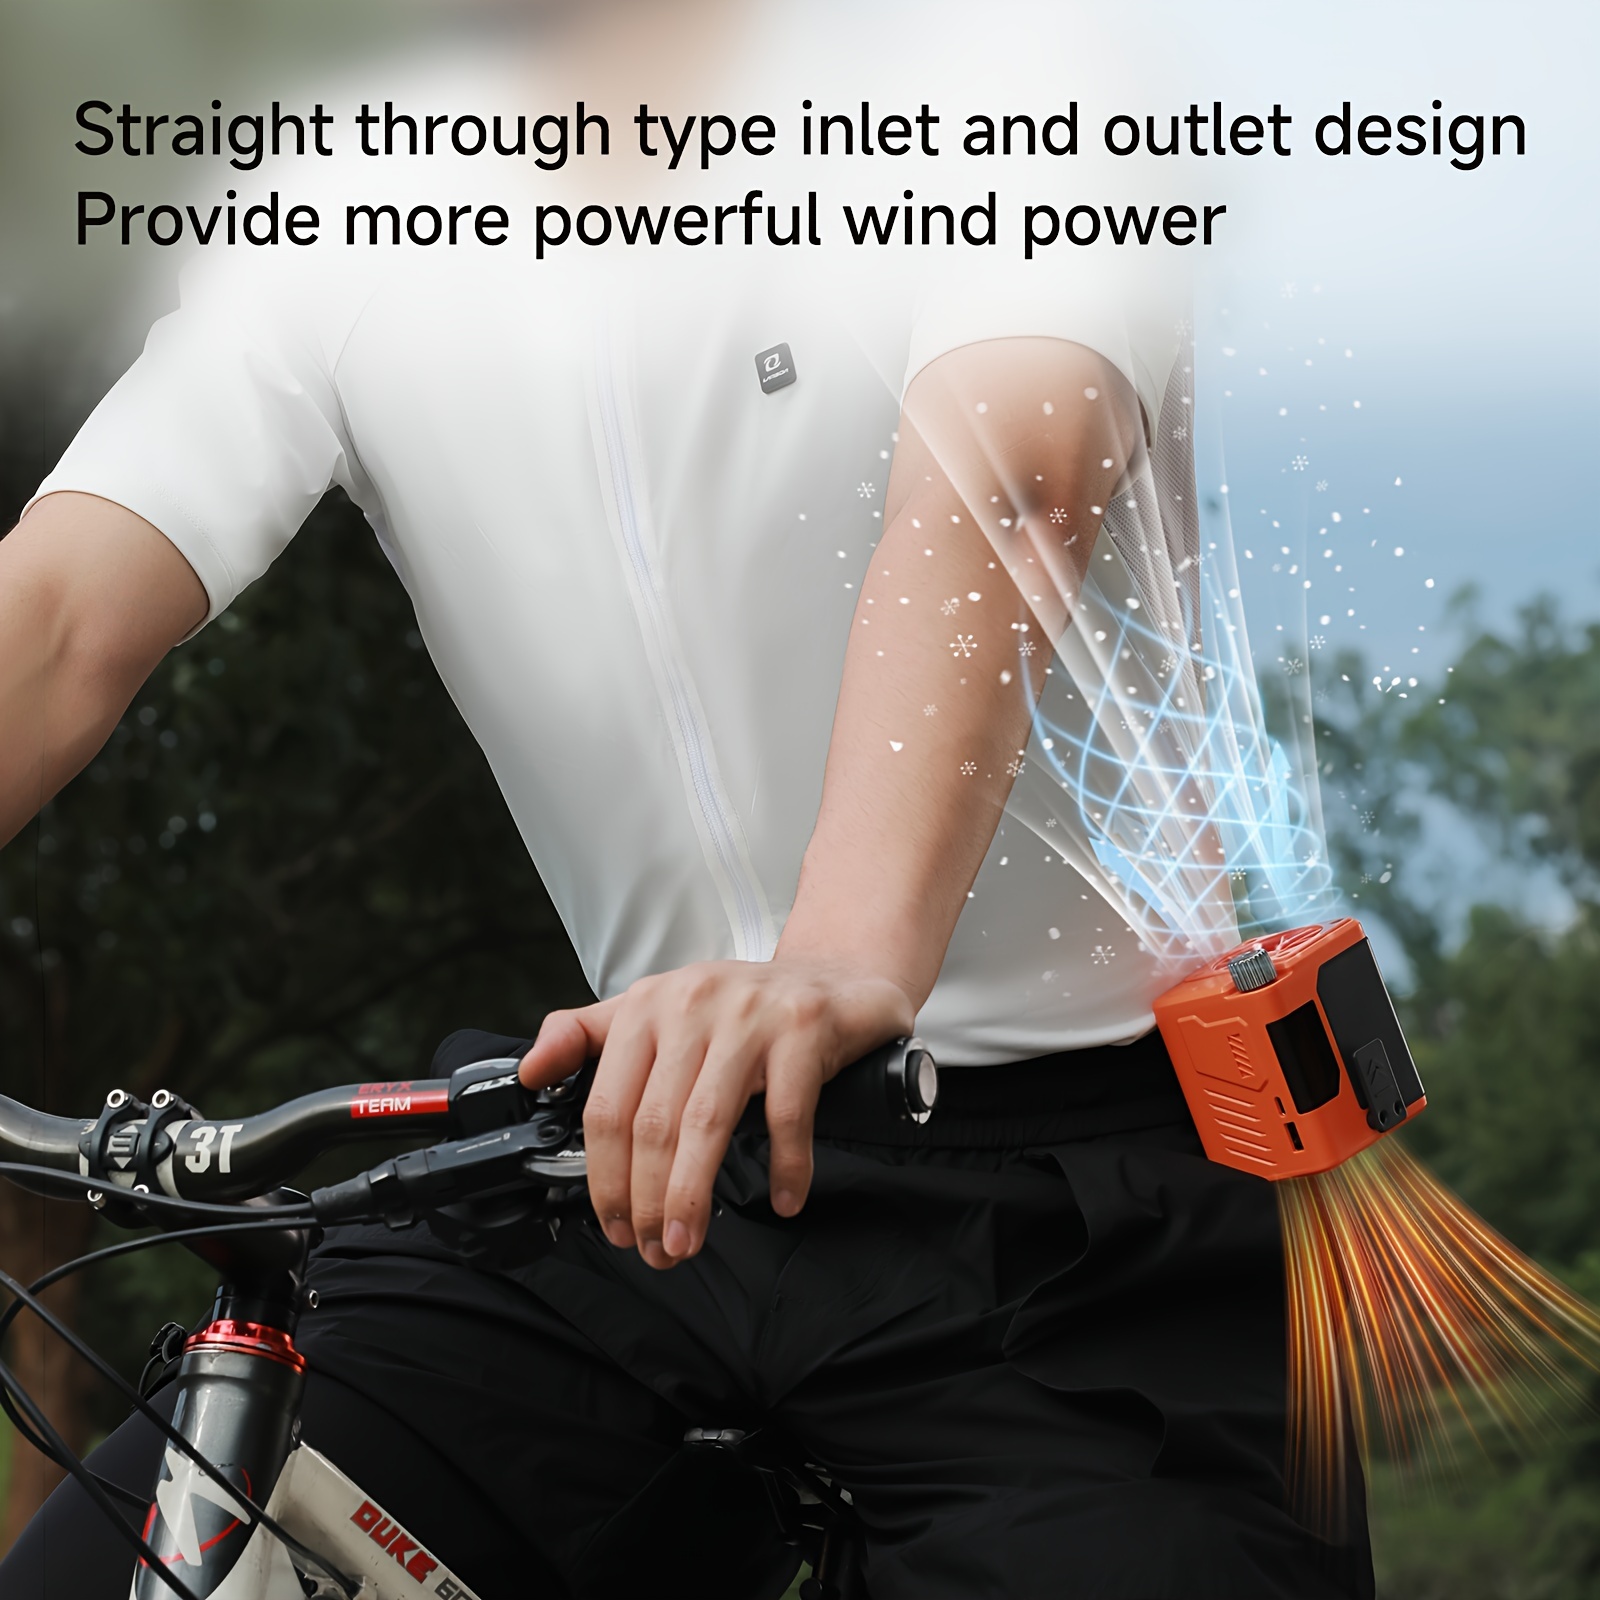 

10000mah Portable Waist Clip Fan, 10h Working Time, 13000rpm Strong Airflow, 1-100 Speed, Rechargeable Battery Powered Personal Usb Belt Fan For Cycling, Sports, Farm Work, Hiking